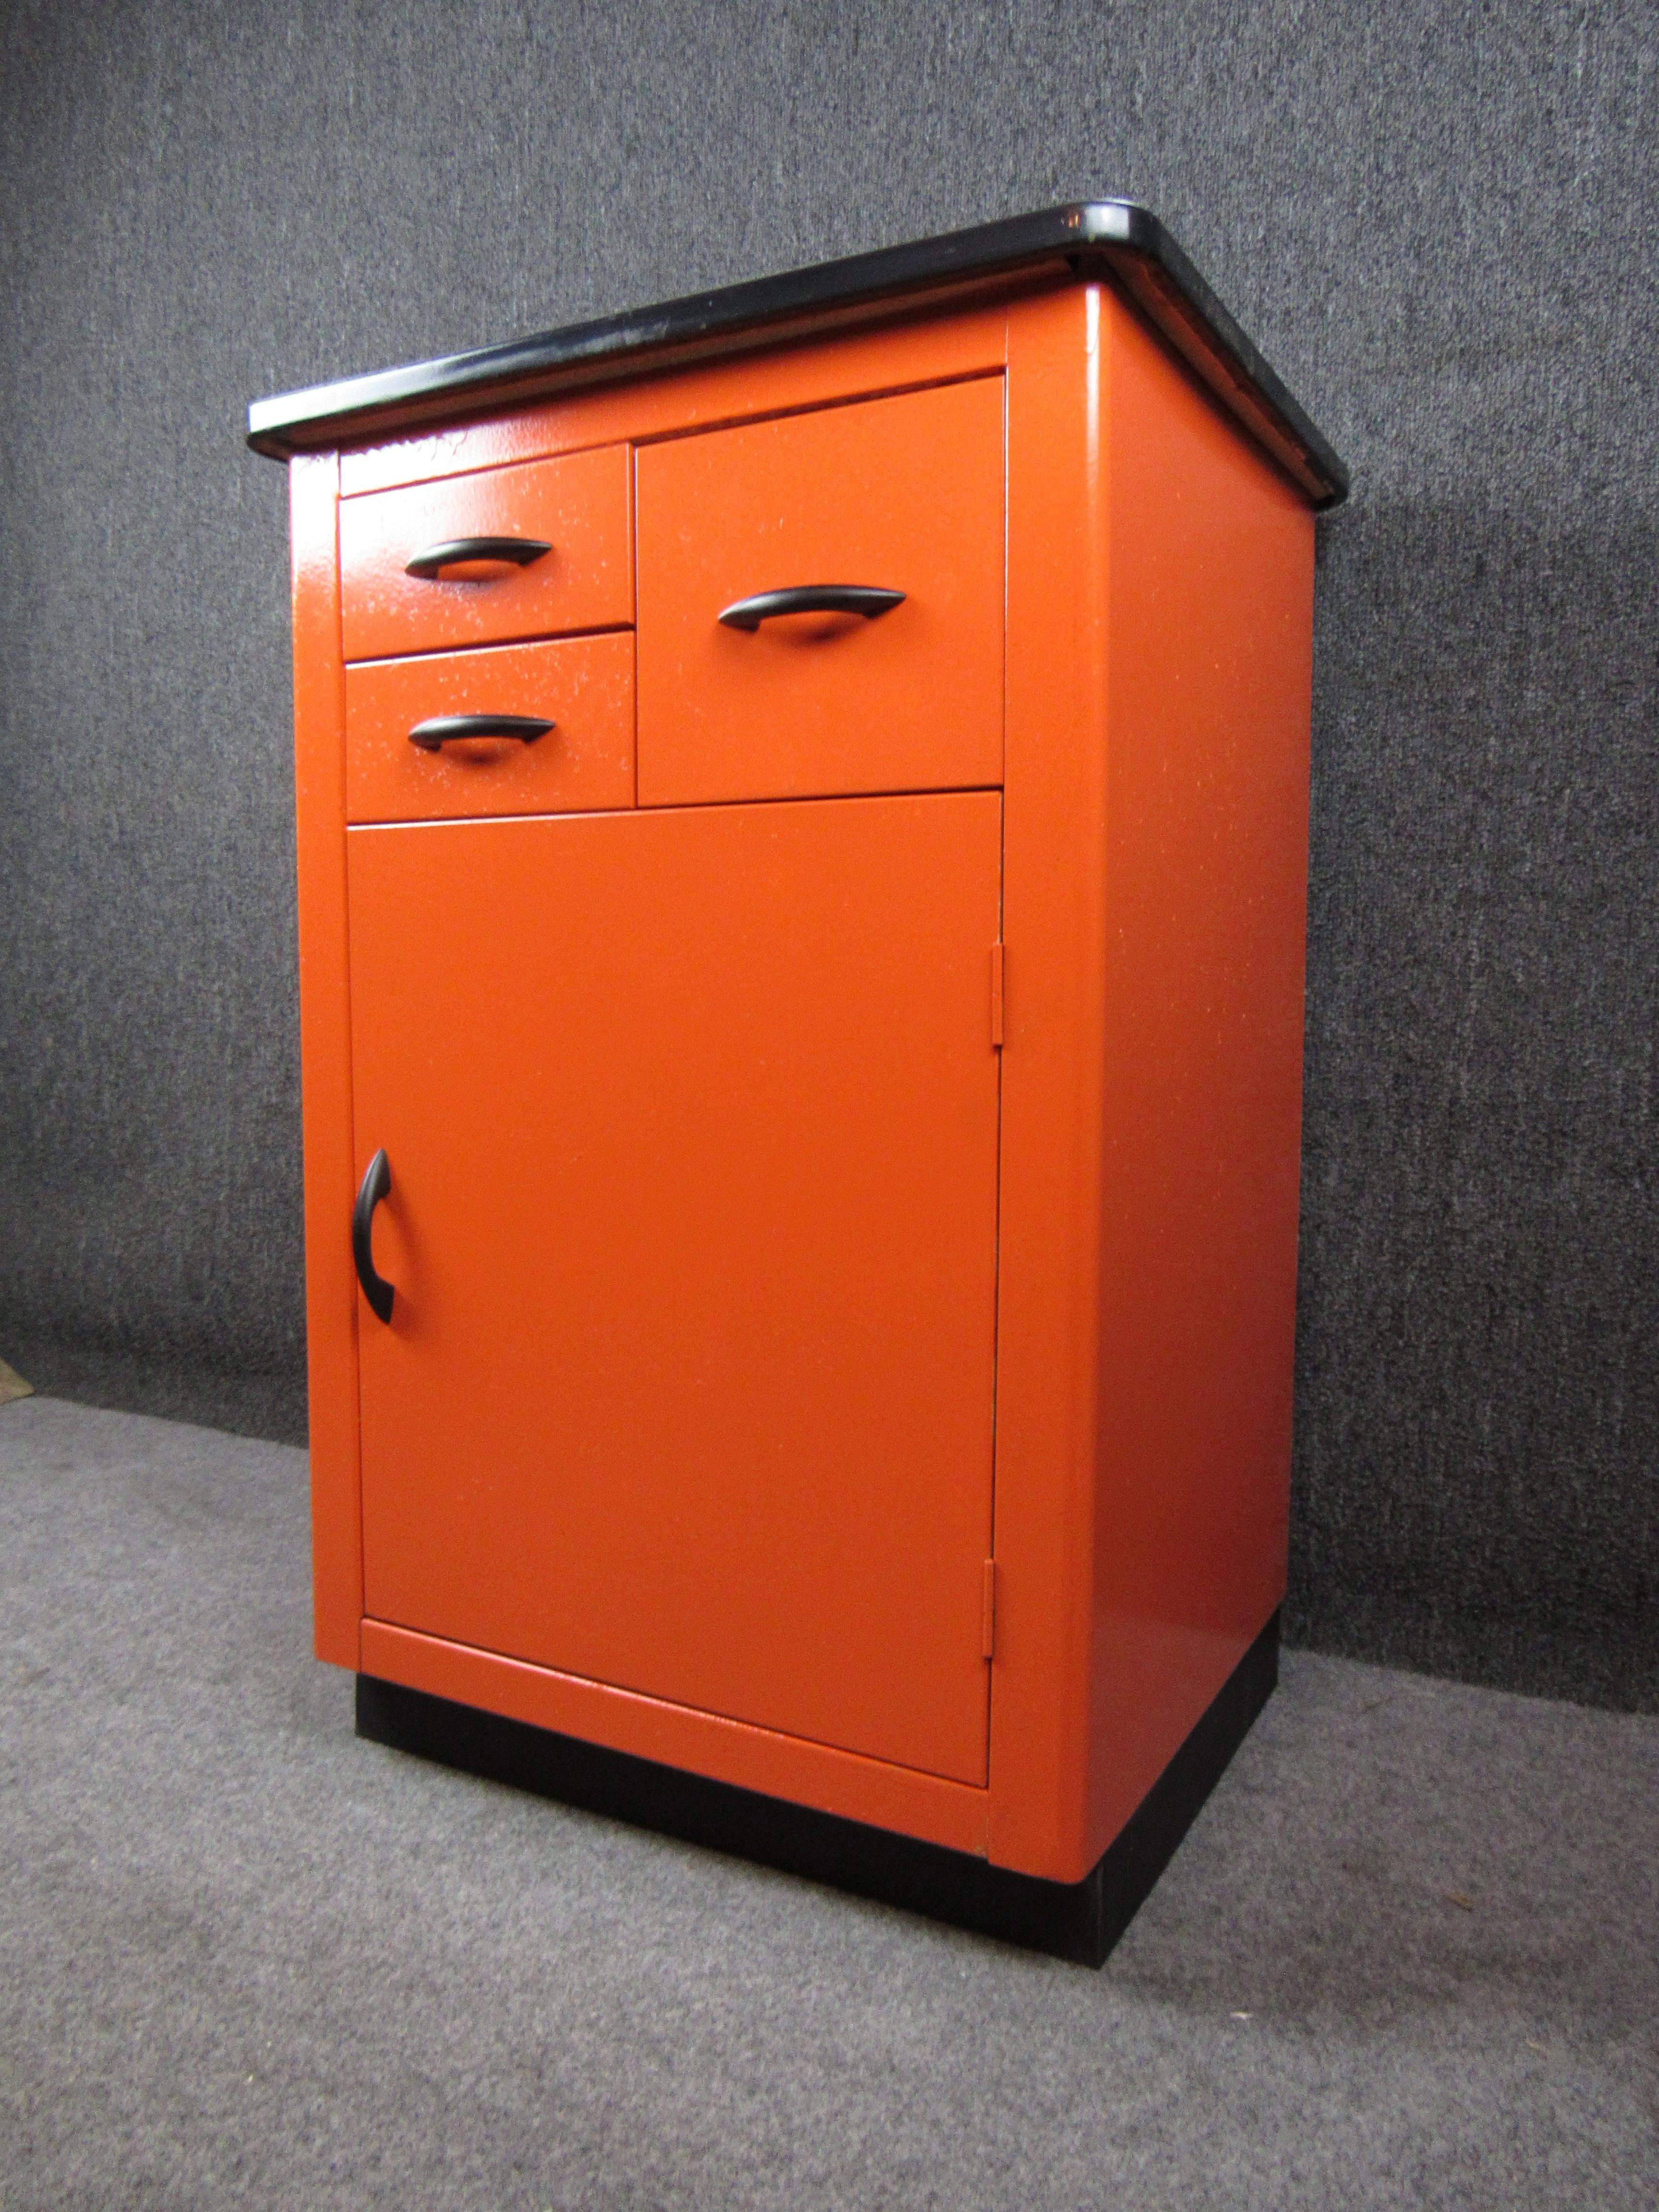 Bring home all the charm of a midcentury summer camp with this wonderful orange enameled metal cabinet. Featuring a clean white top and sharp black metal accents, this cabinet is sure to heighten the style of any room, whether in the home or office!